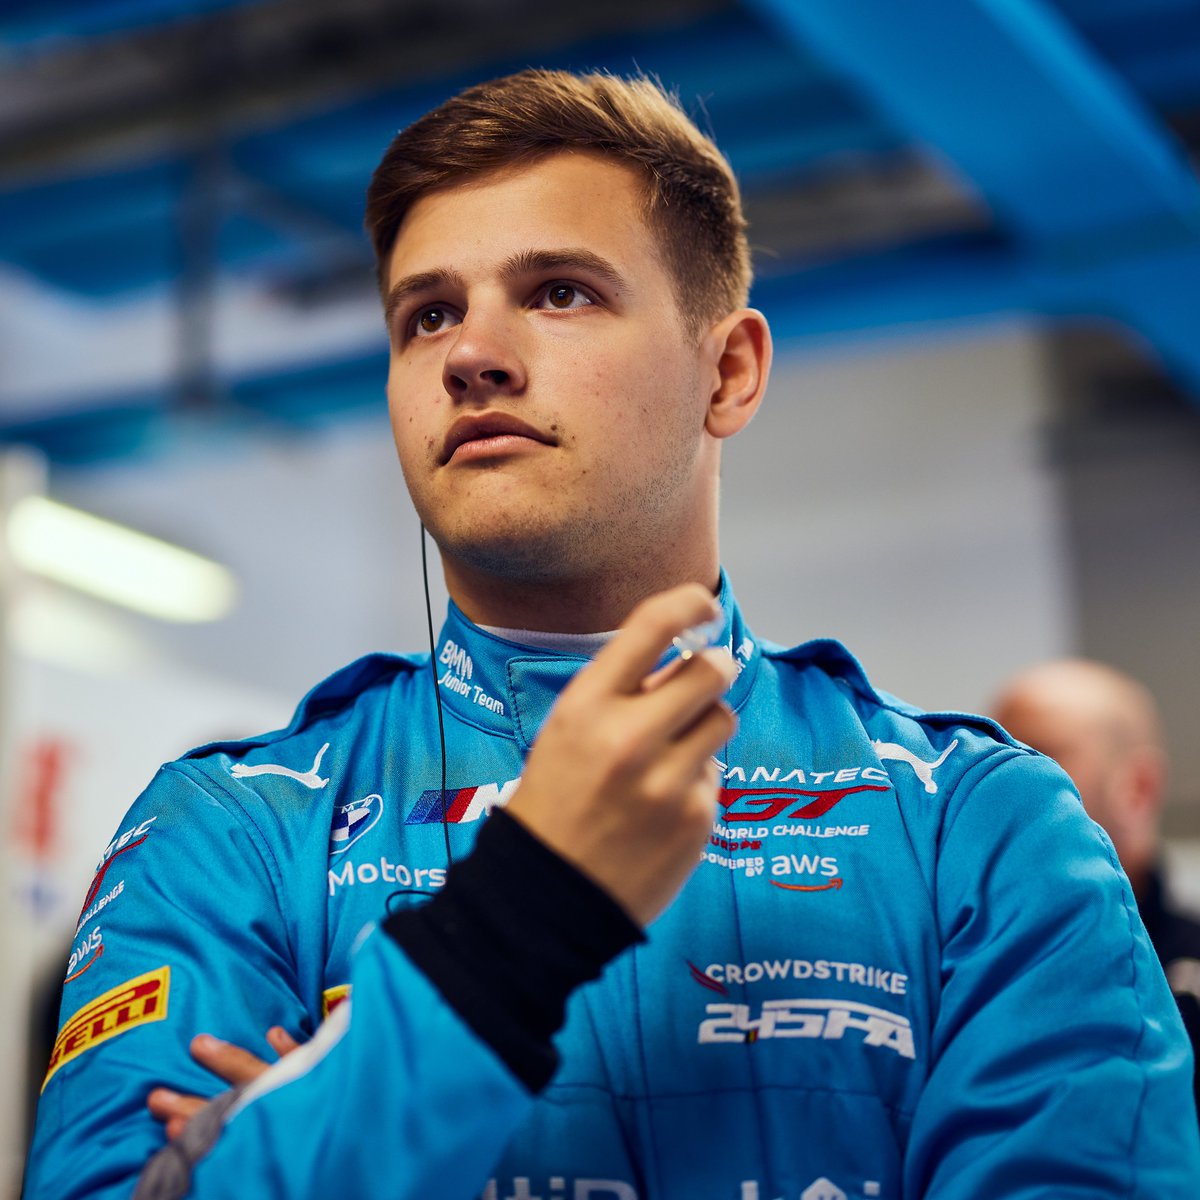 Driver update.

Neil Verhagen will substitute for John Edwards during the June 16– 18 SRO Motorsport America weekend at VIRginia International Raceway.

He'll co-drive with Samantha Tan in the No. 38 BMW M4 GT3.